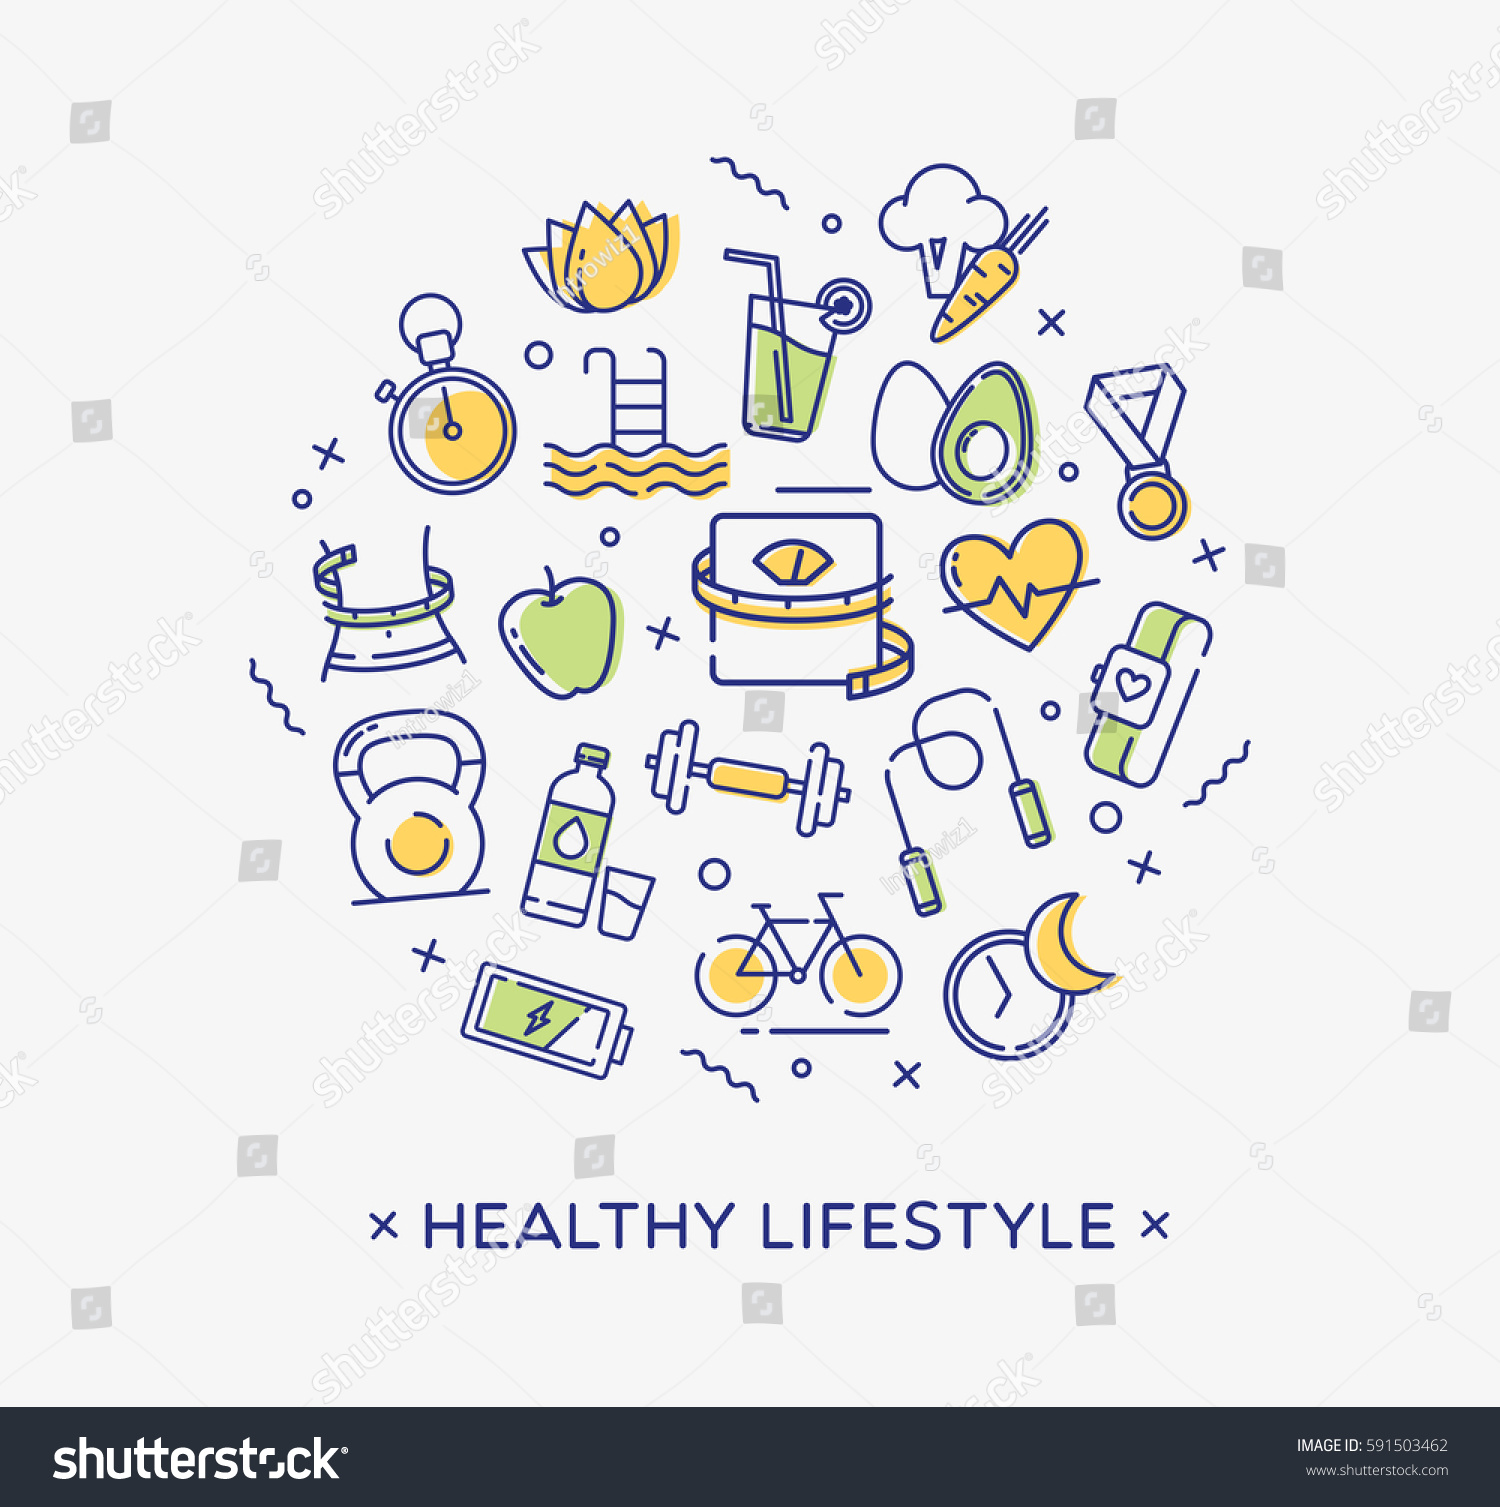 SVG of Healthy lifestyle illustration, dieting, fitness and nutrition.
 svg